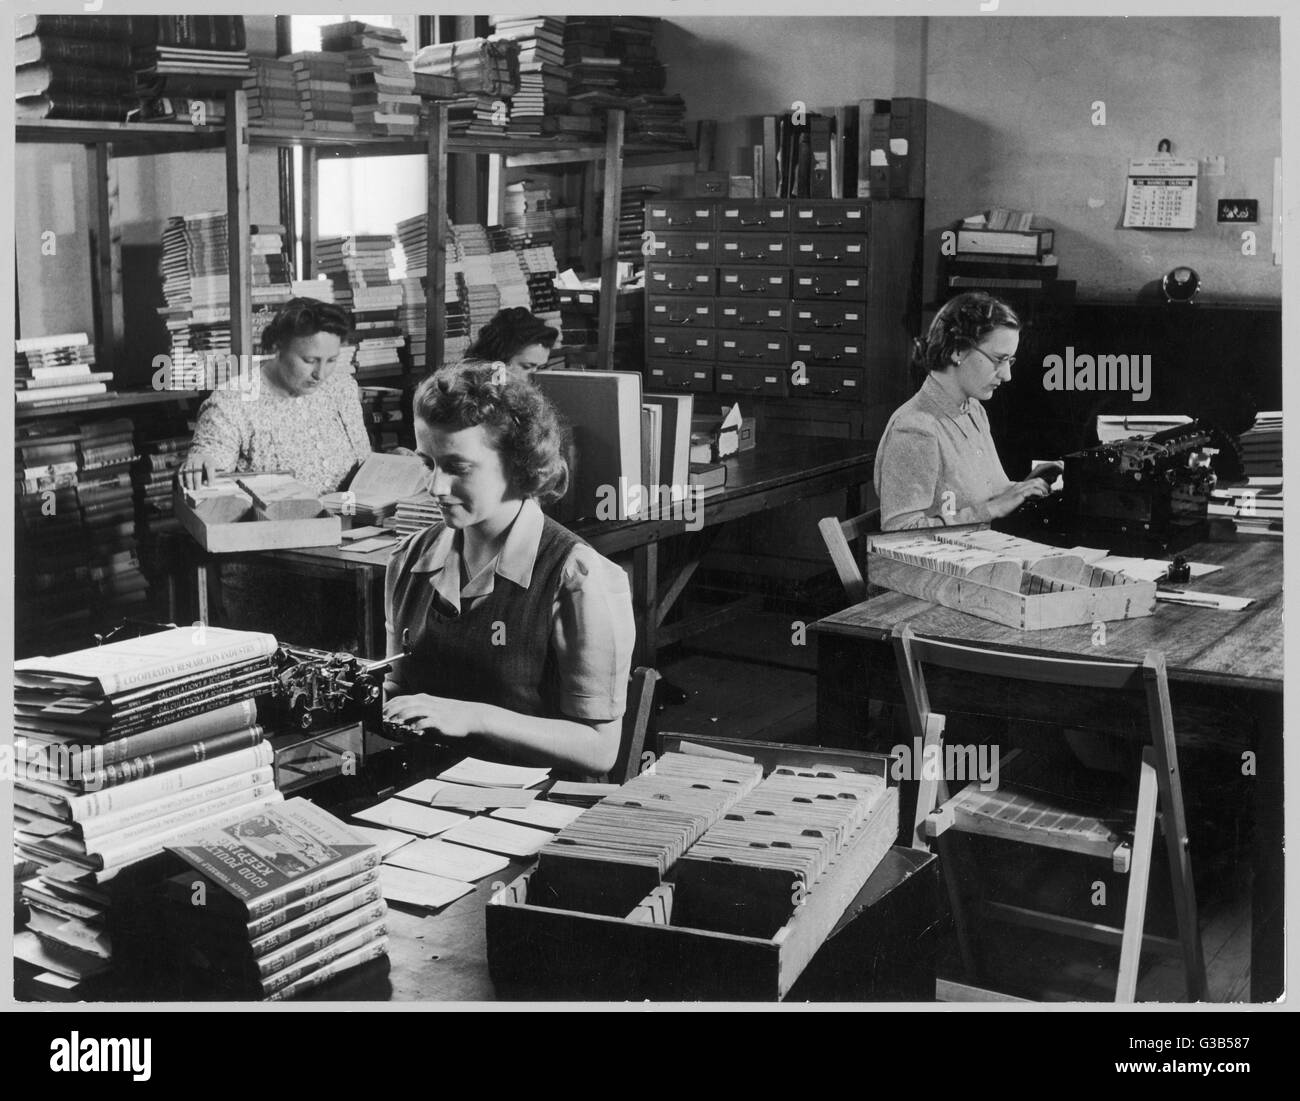 A model of tidiness and  application, this public  library office is neatly and  sparsely laid out; its  female staff appear to be  absorbed in their work.     Date: 1947 Stock Photo